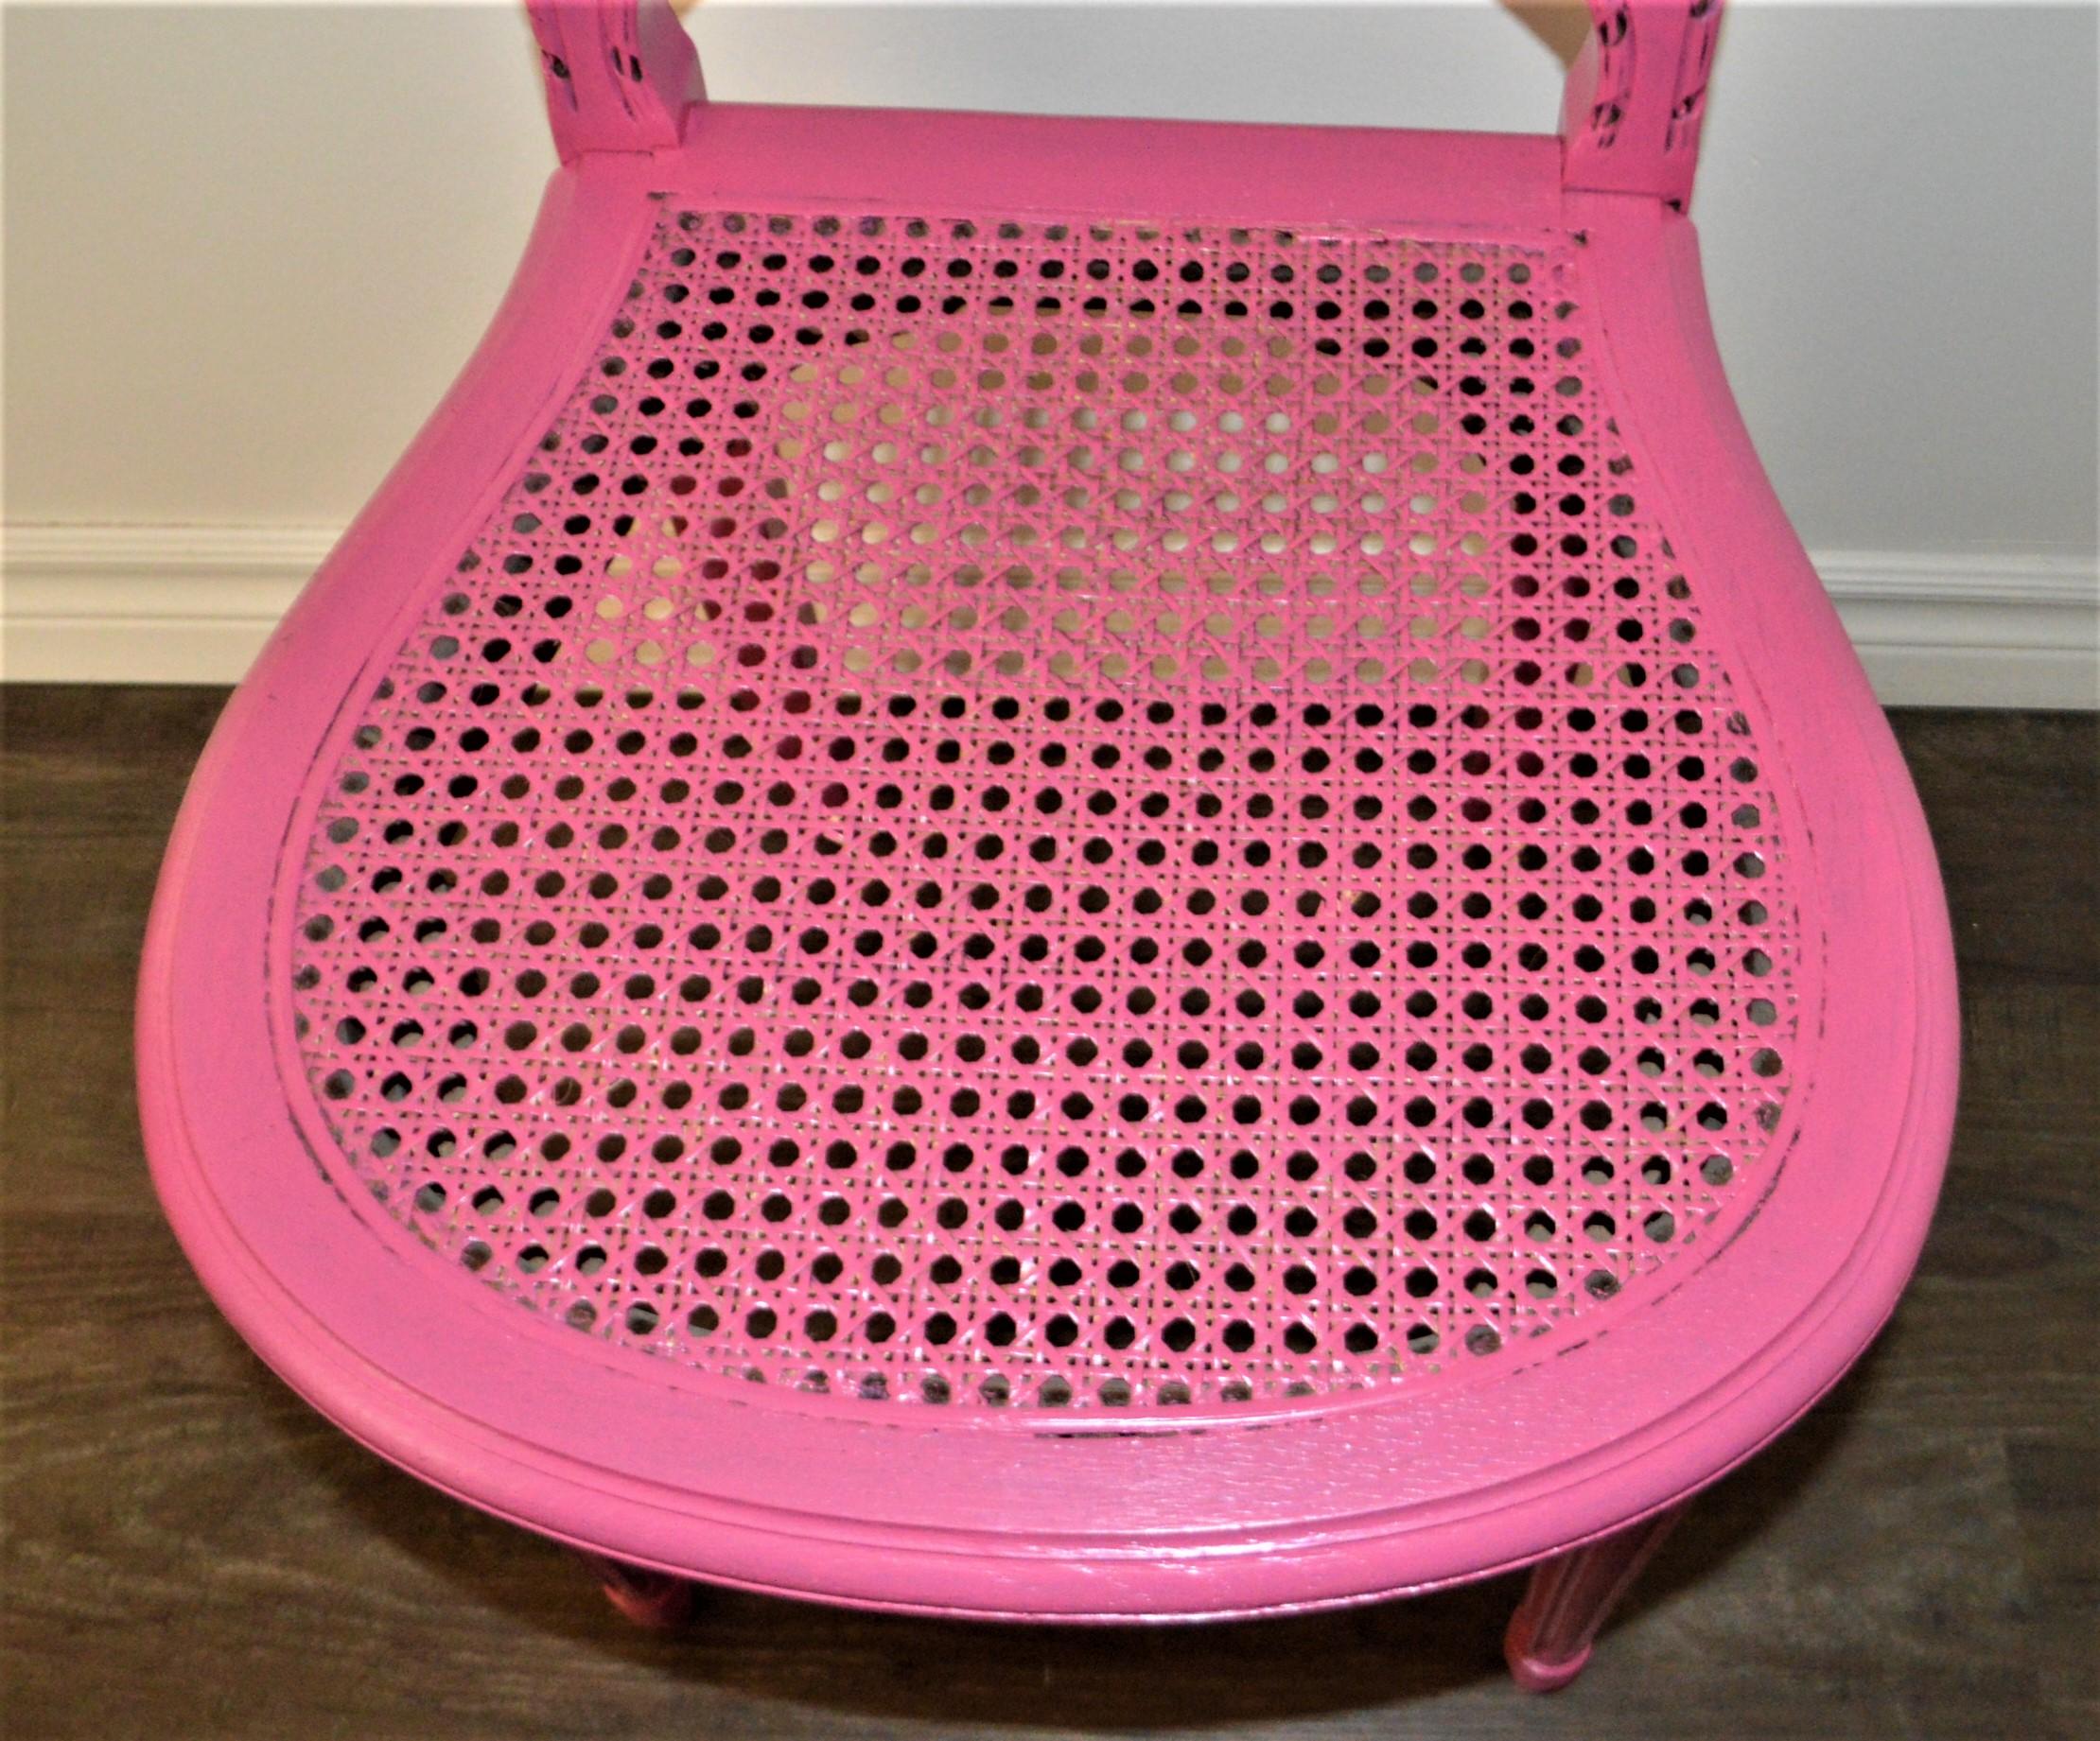 Louis XVI Caned Back and Seat Side Chair from France, Painted Pink In Good Condition For Sale In Oakville, ON